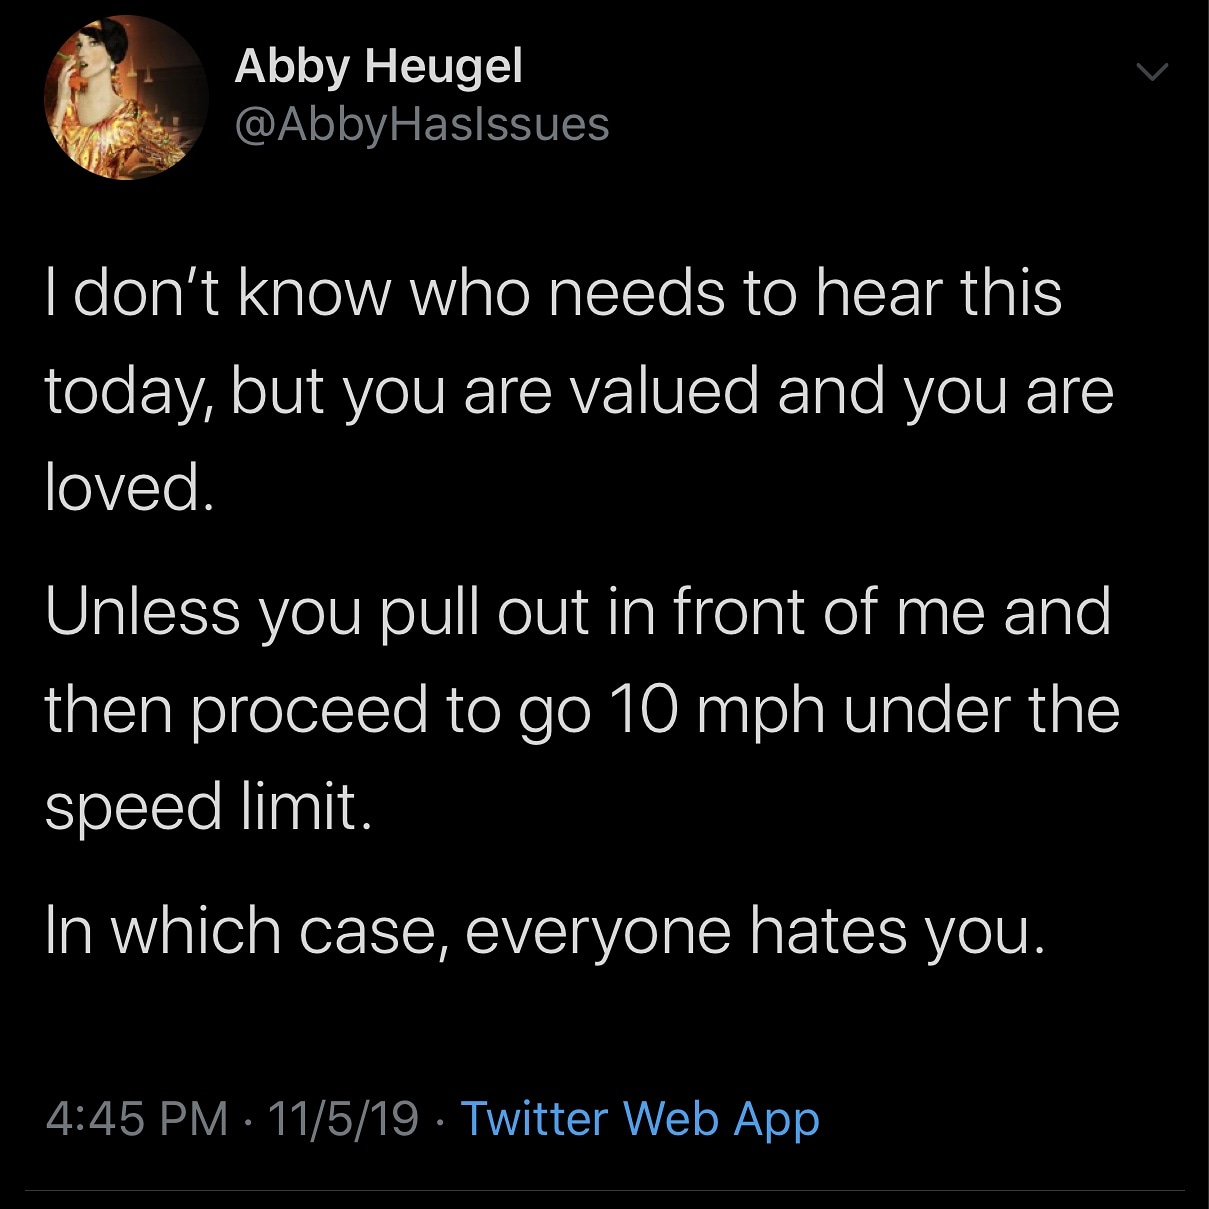 atmosphere - Abby Heugel I don't know who needs to hear this today, but you are valued and you are loved. Unless you pull out in front of me and then proceed to go 10 mph under the speed limit. In which case, everyone hates you. 11519. Twitter Web App